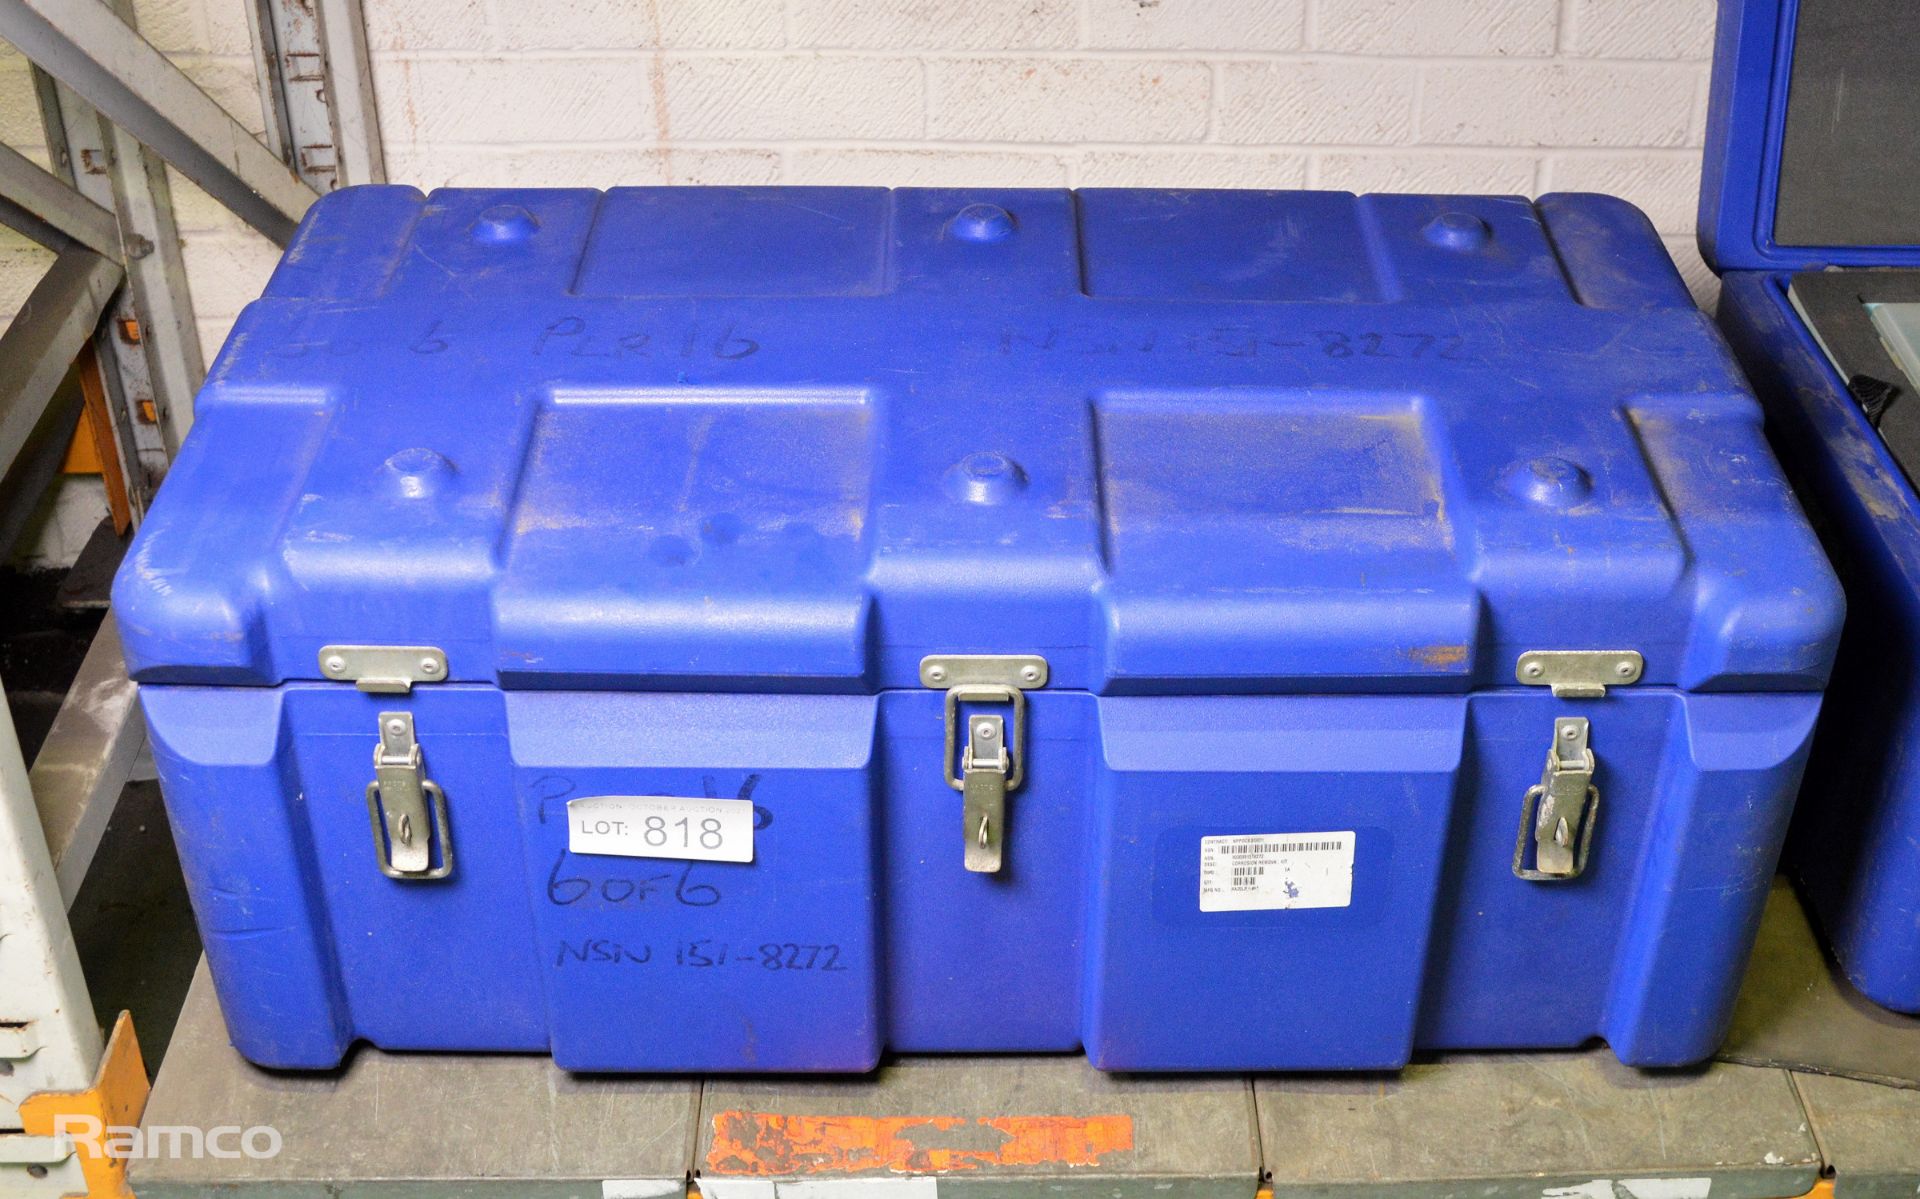 Corrosion removal kit in carry case - Image 8 of 8